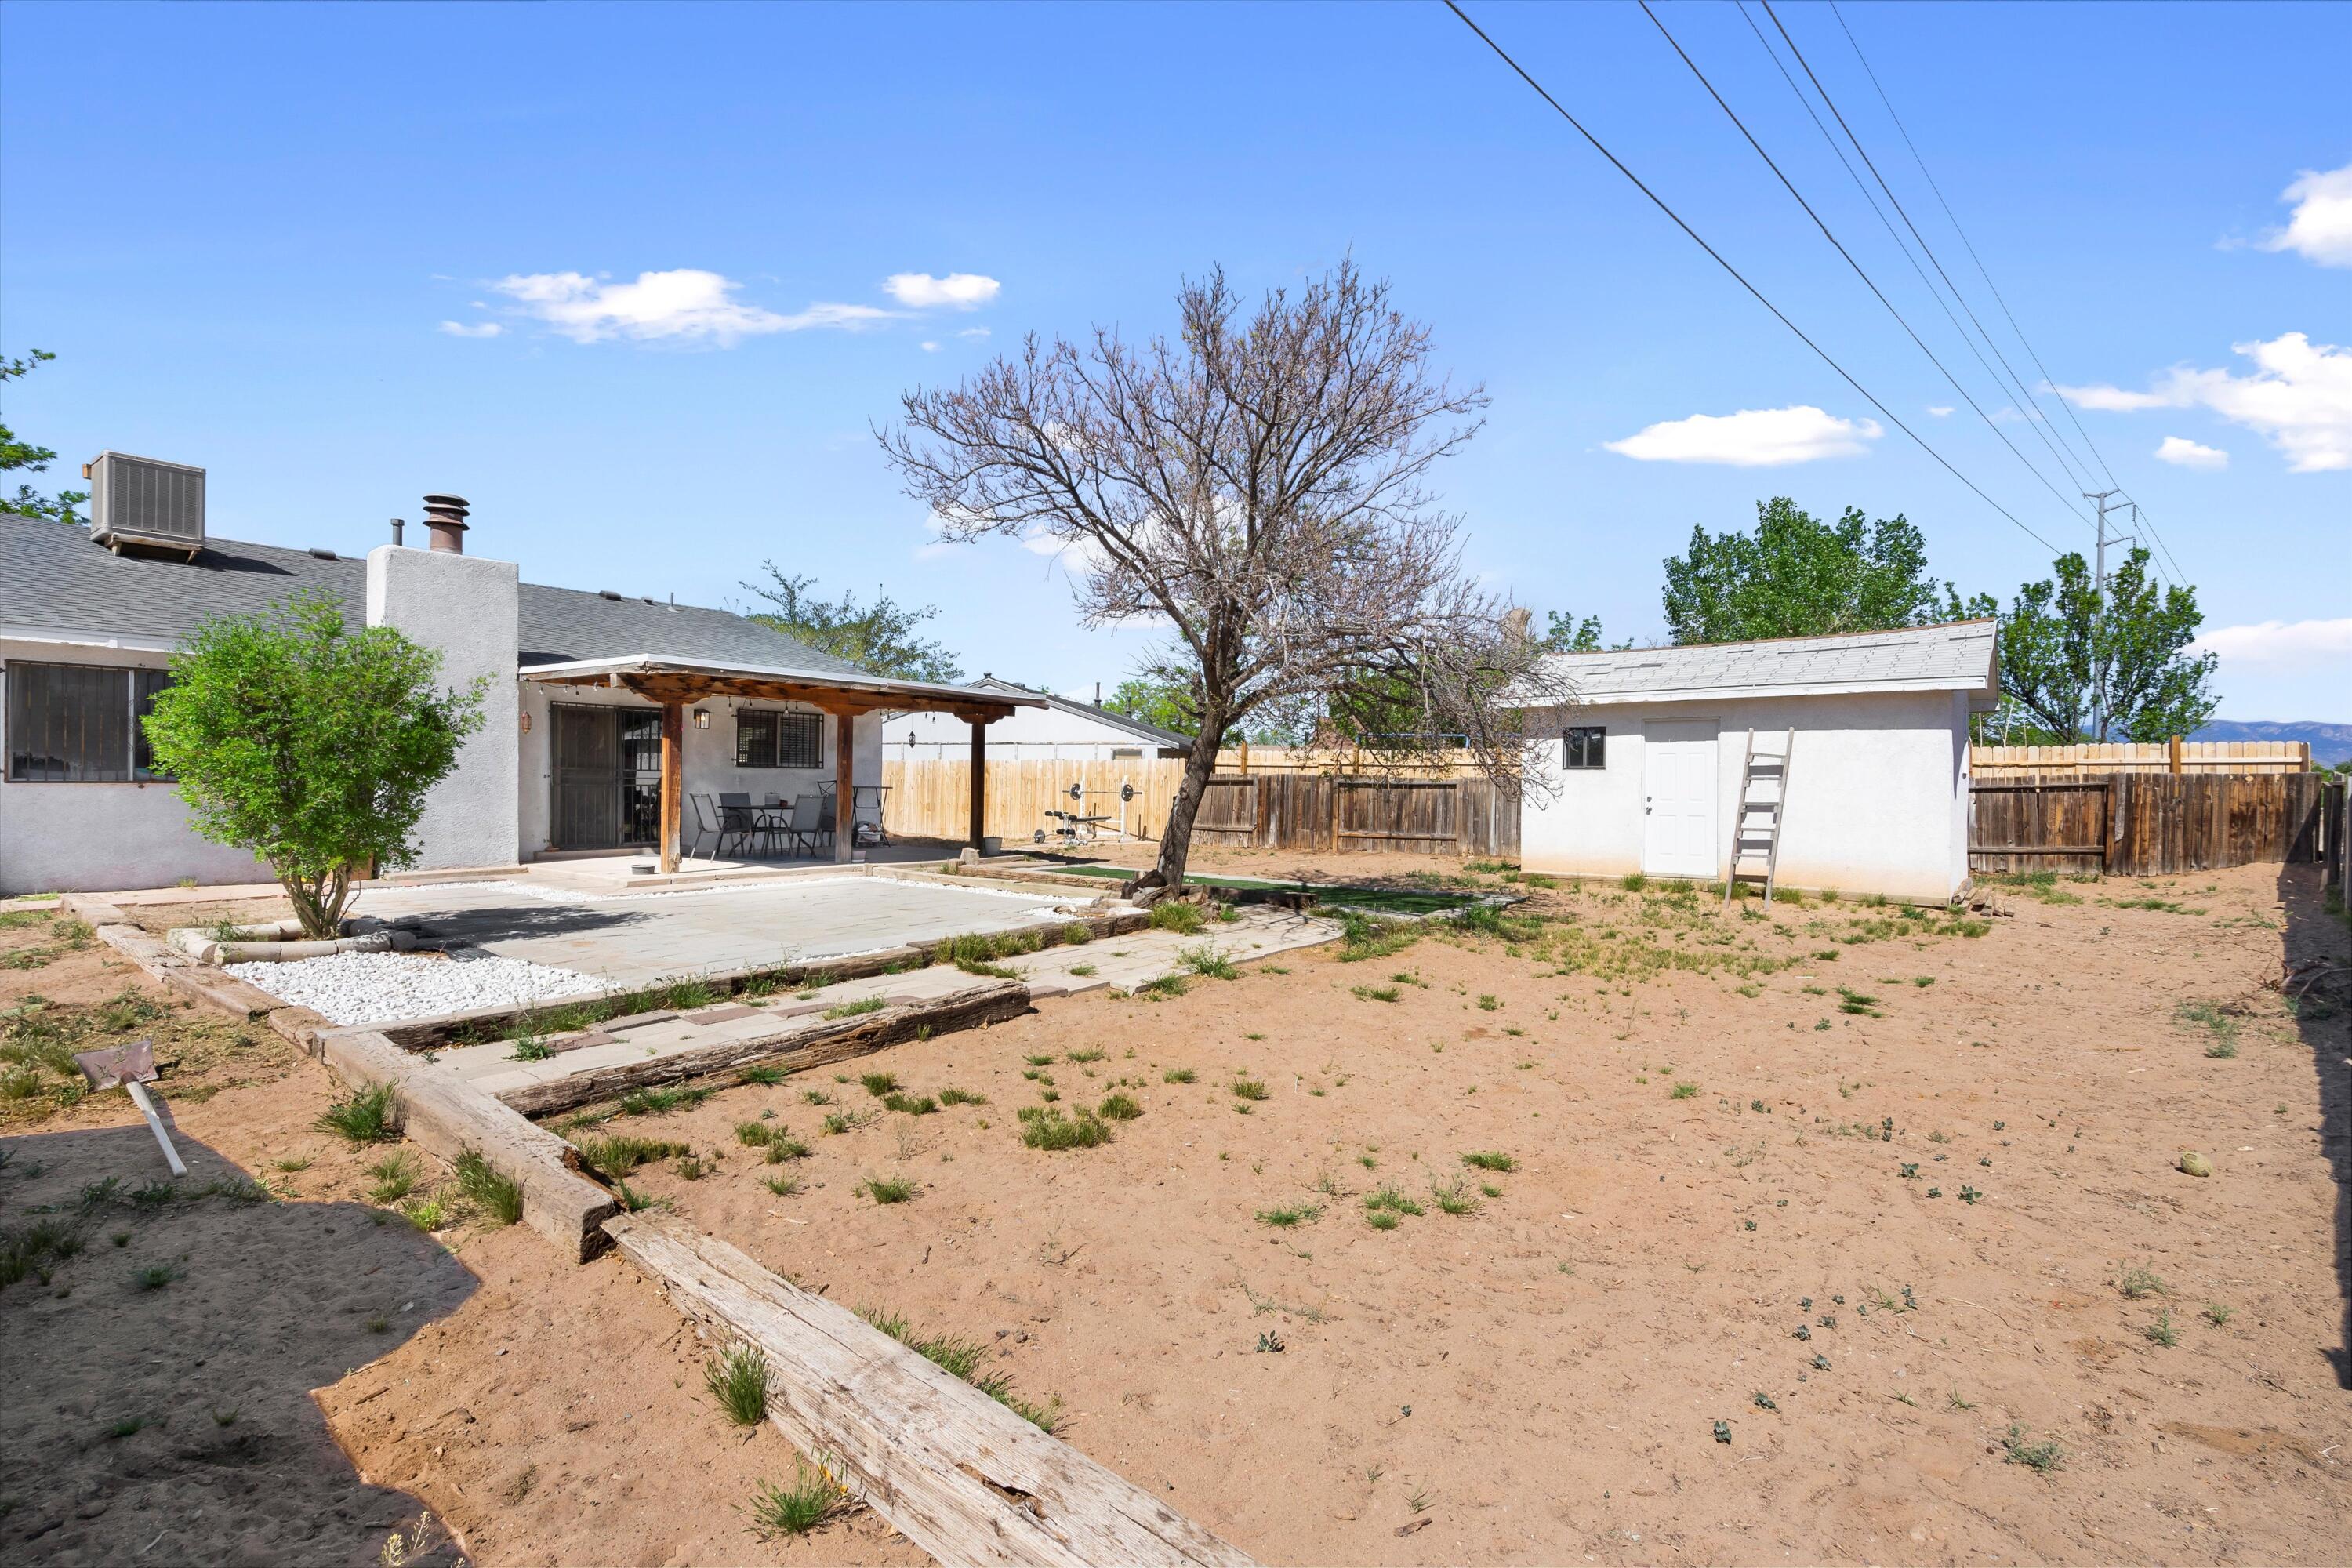 6304 Pastorcito Drive NW, Albuquerque, New Mexico 87120, 3 Bedrooms Bedrooms, ,2 BathroomsBathrooms,Residential,For Sale,6304 Pastorcito Drive NW,1061295